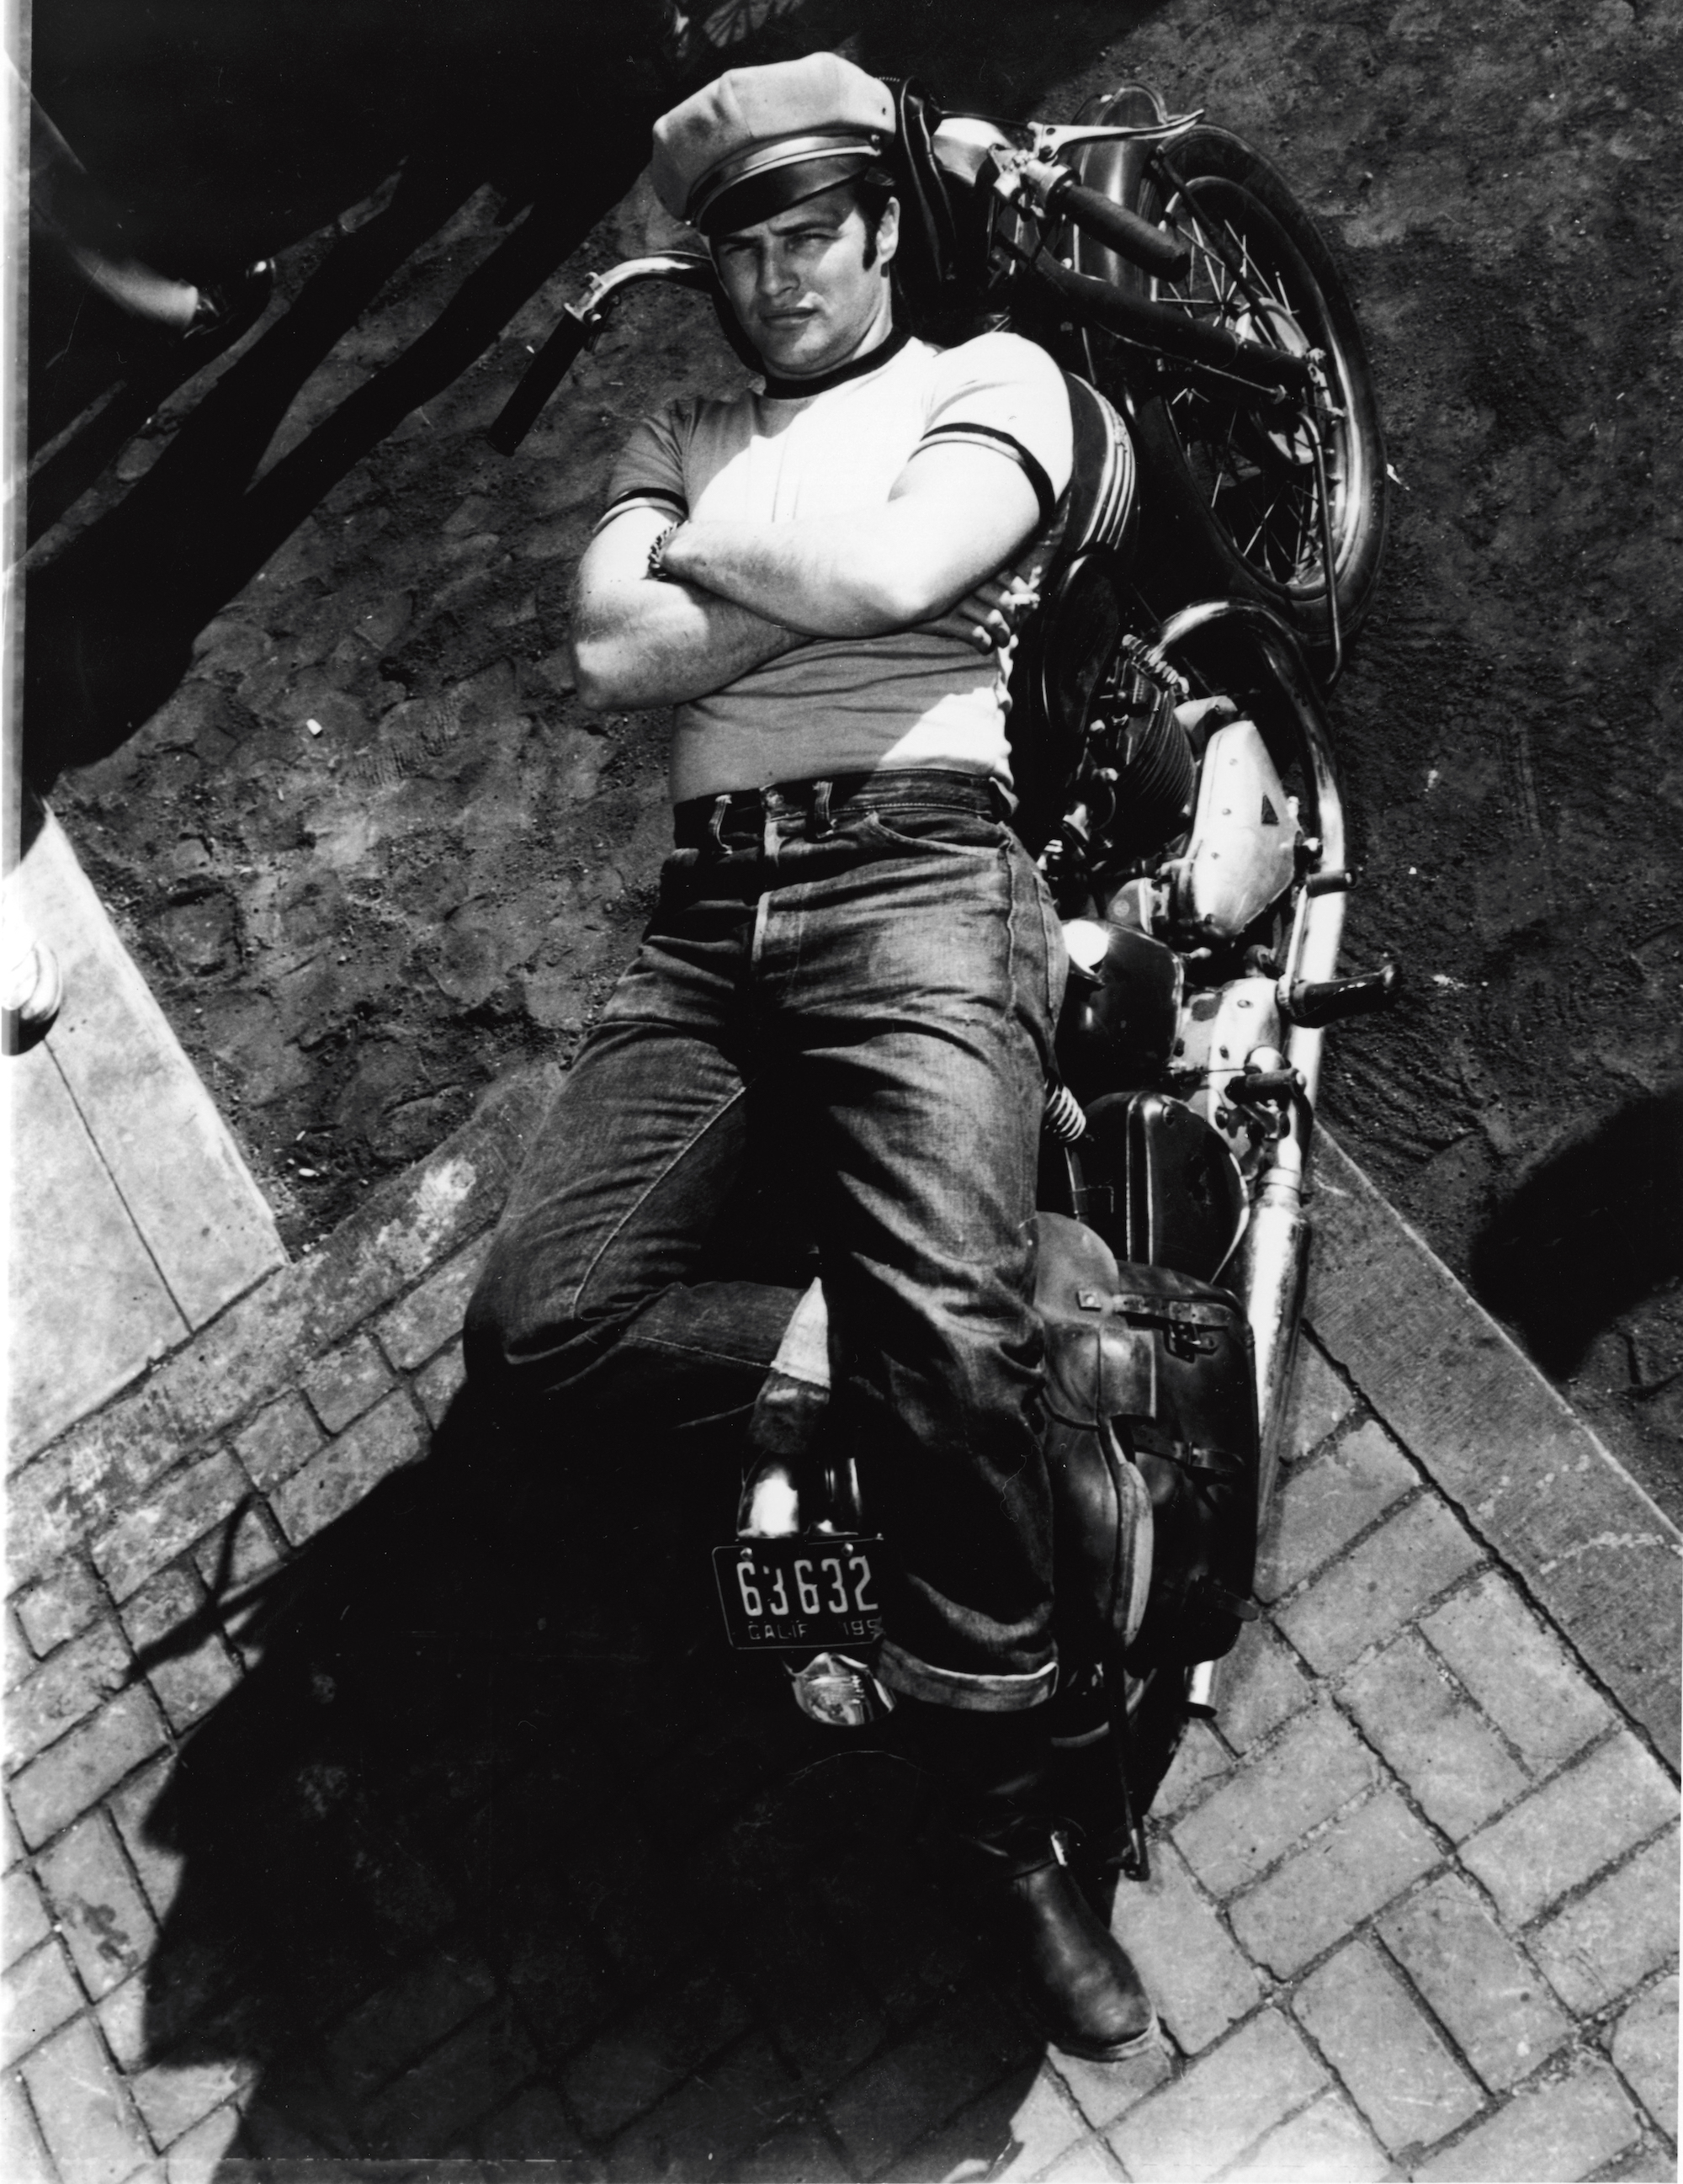 American actor Marlon Brando (1924 - 2004) lies on a motorcycle in a publicity shot for the film 'The Wild One,' directed by Laszlo Benedek, California, 1953. (Photo by Columbia TriStar/Courtesy of Getty Images)